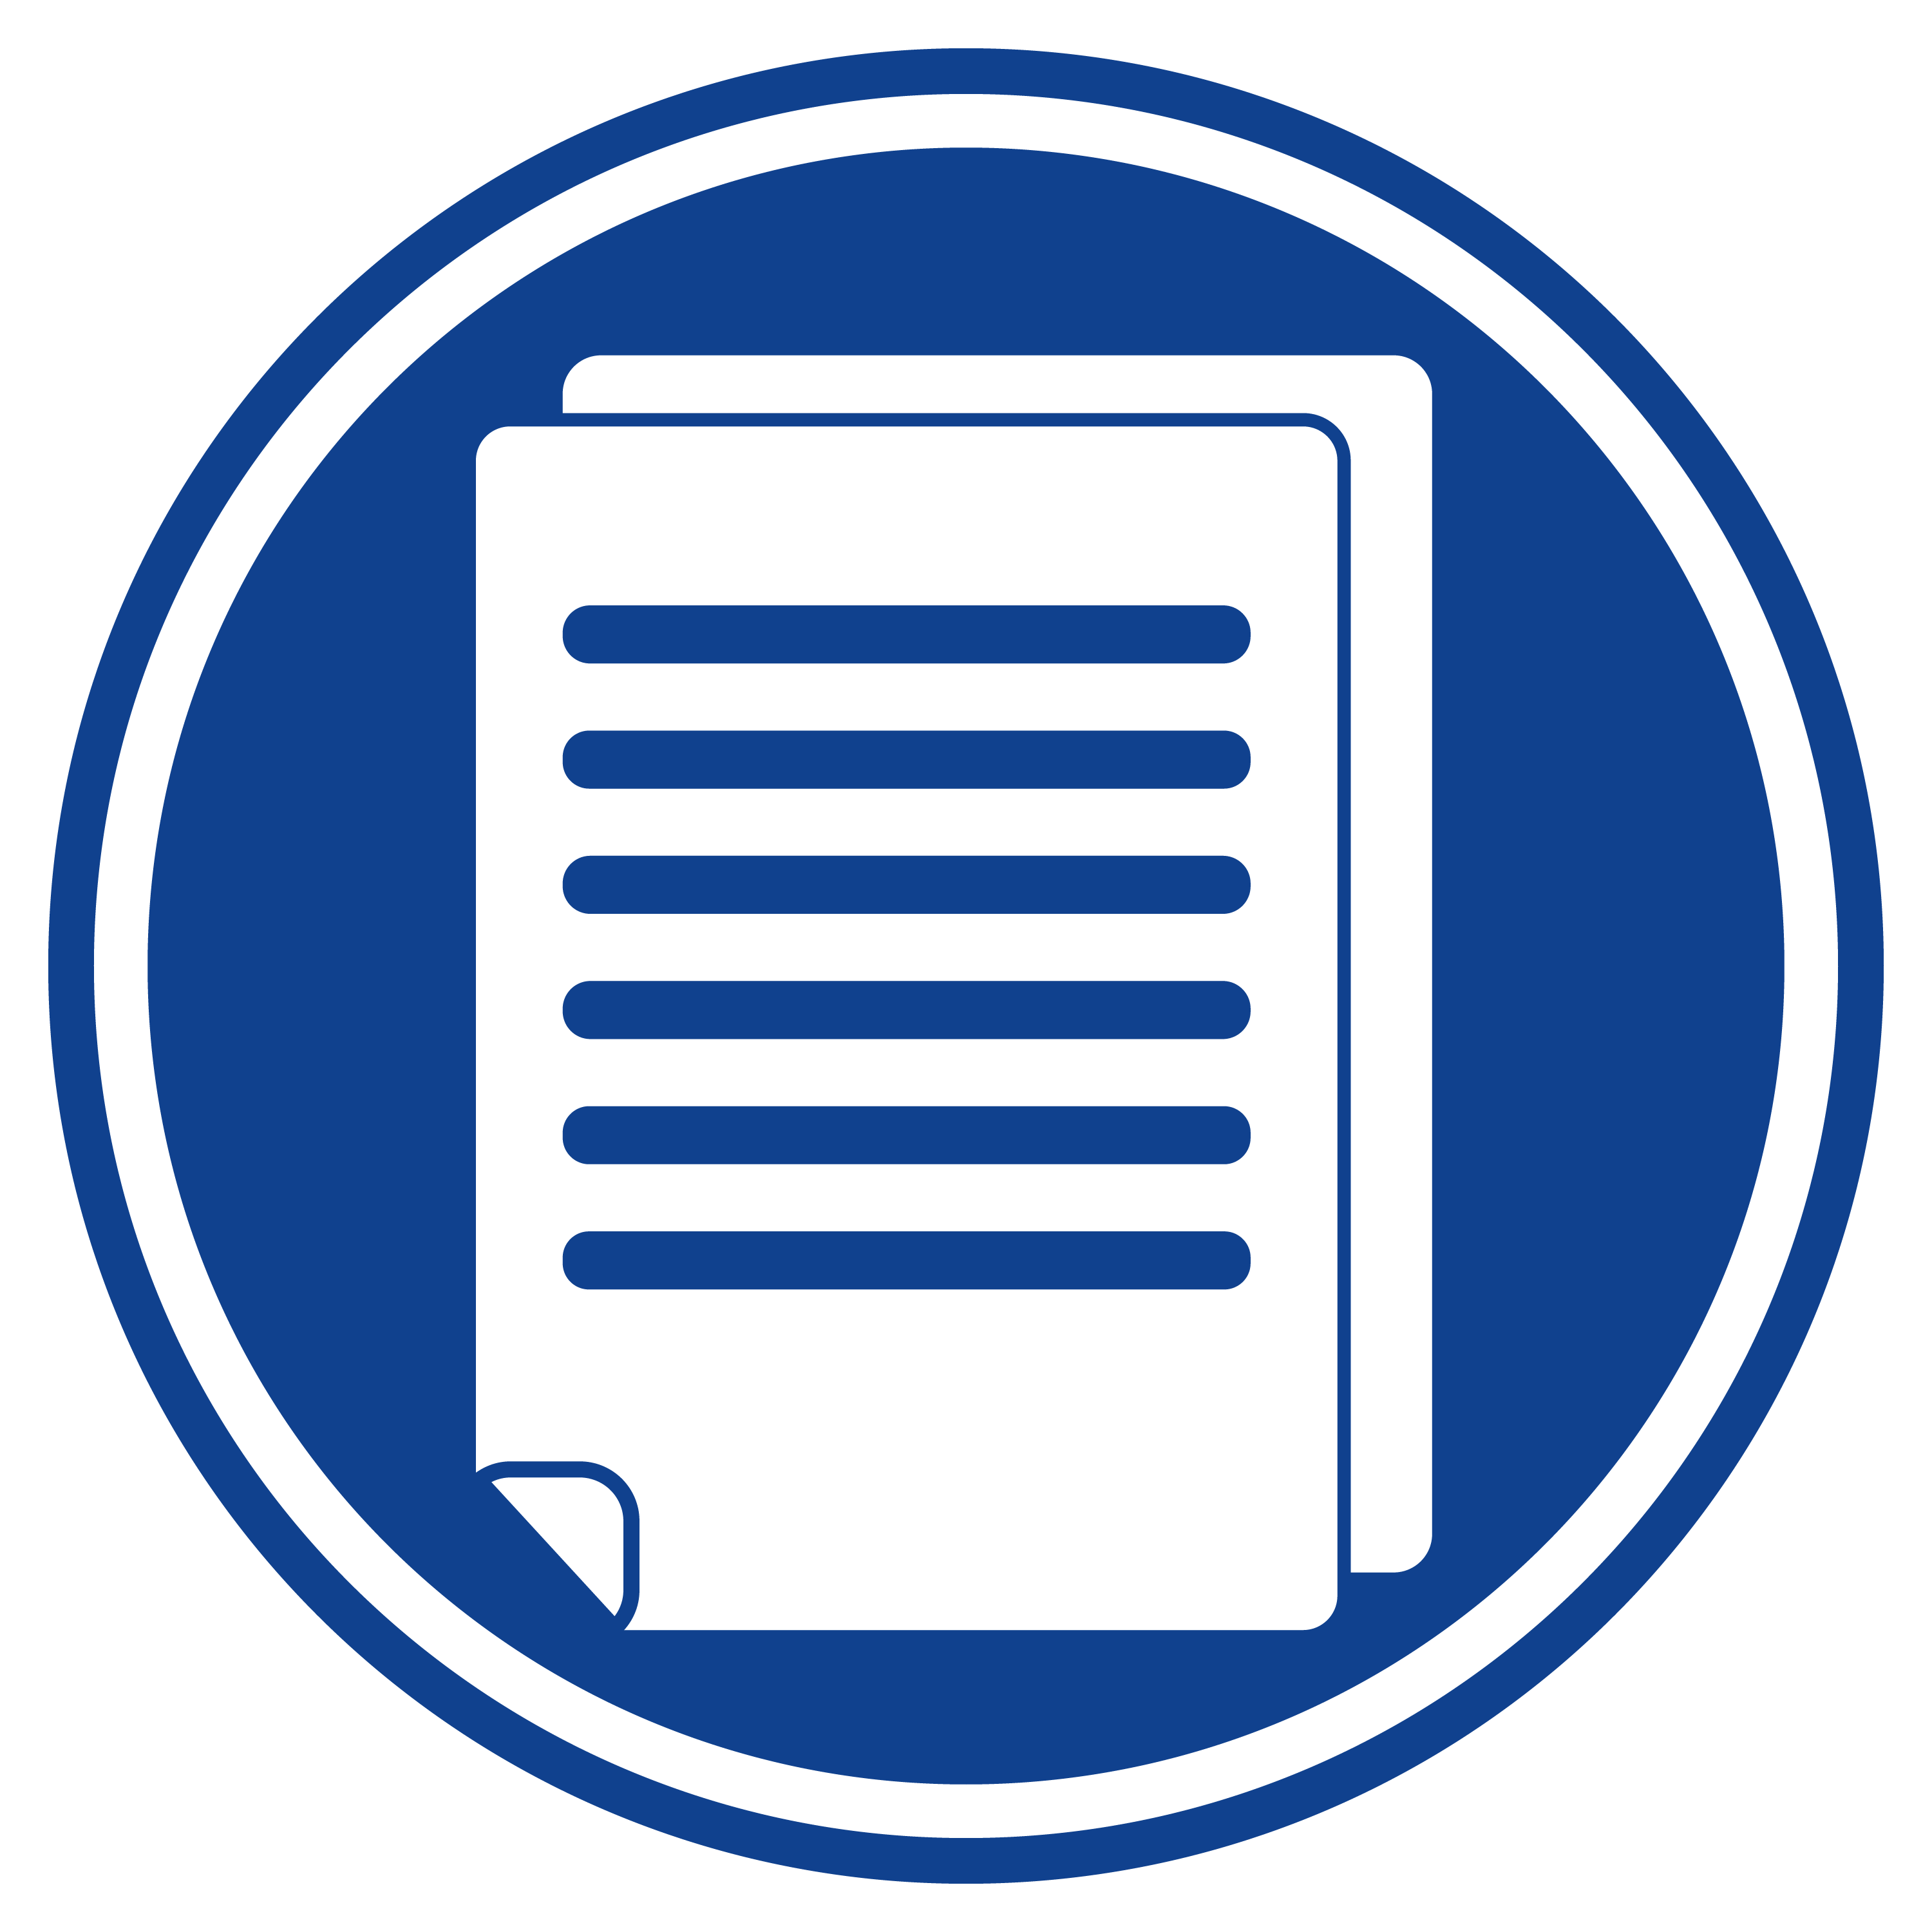 waste-icon-paper-circle.png